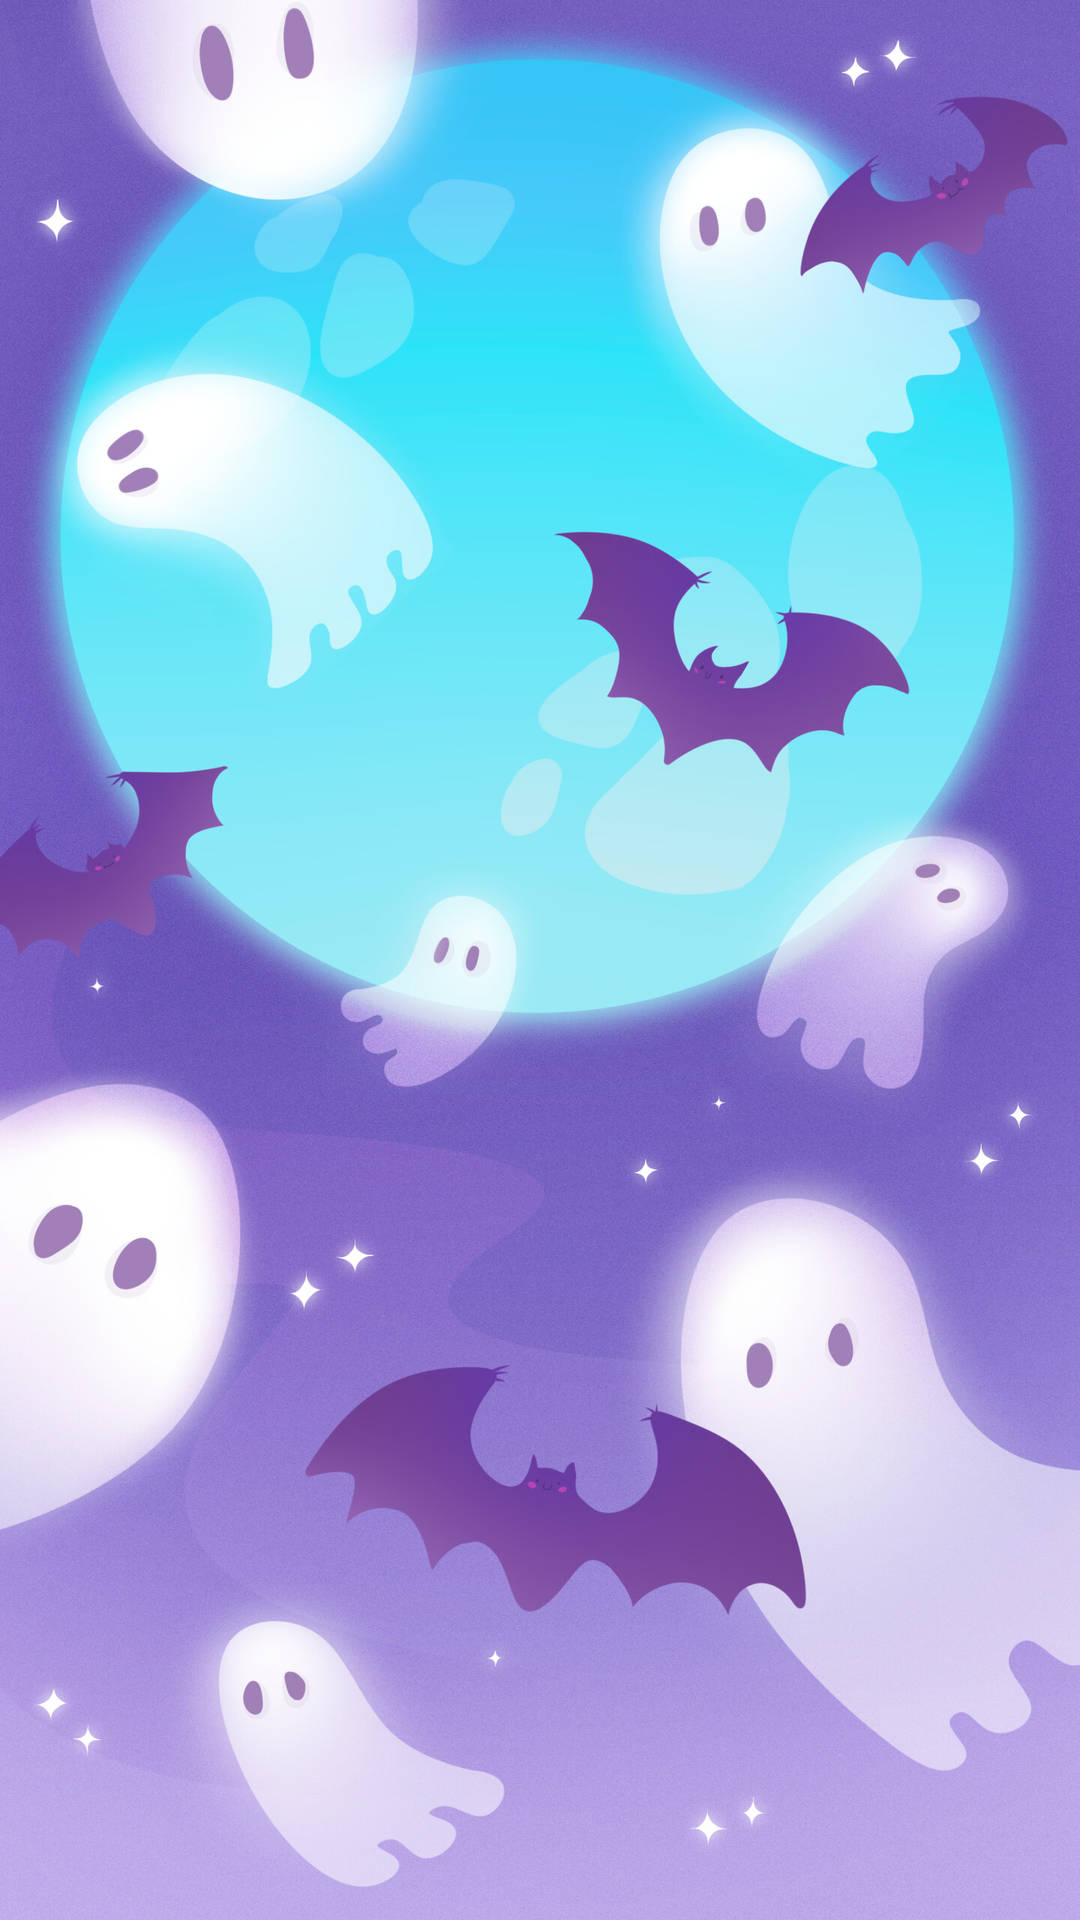 Cute Ghosts And Bats Halloween Phone